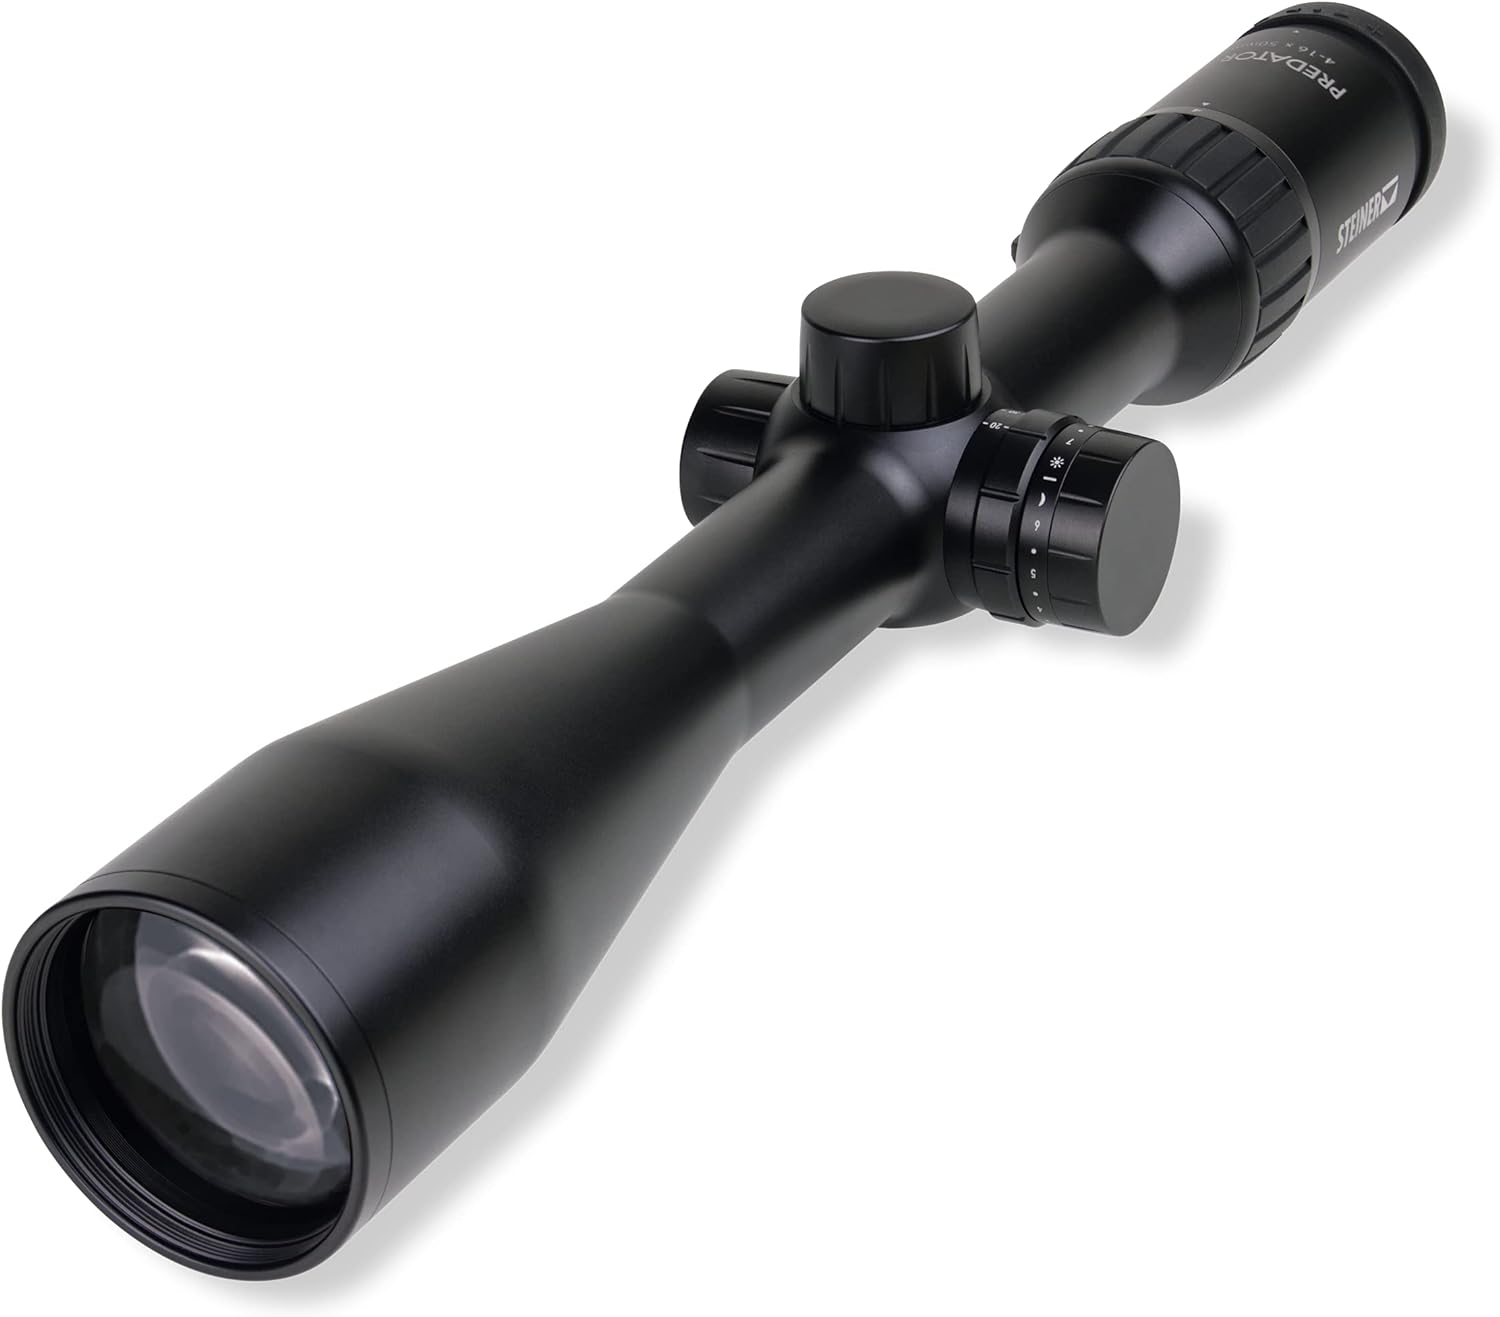 Steiner Predator 4 Series Hunting Rifle Scope With Illuminated E3 Reticle Review